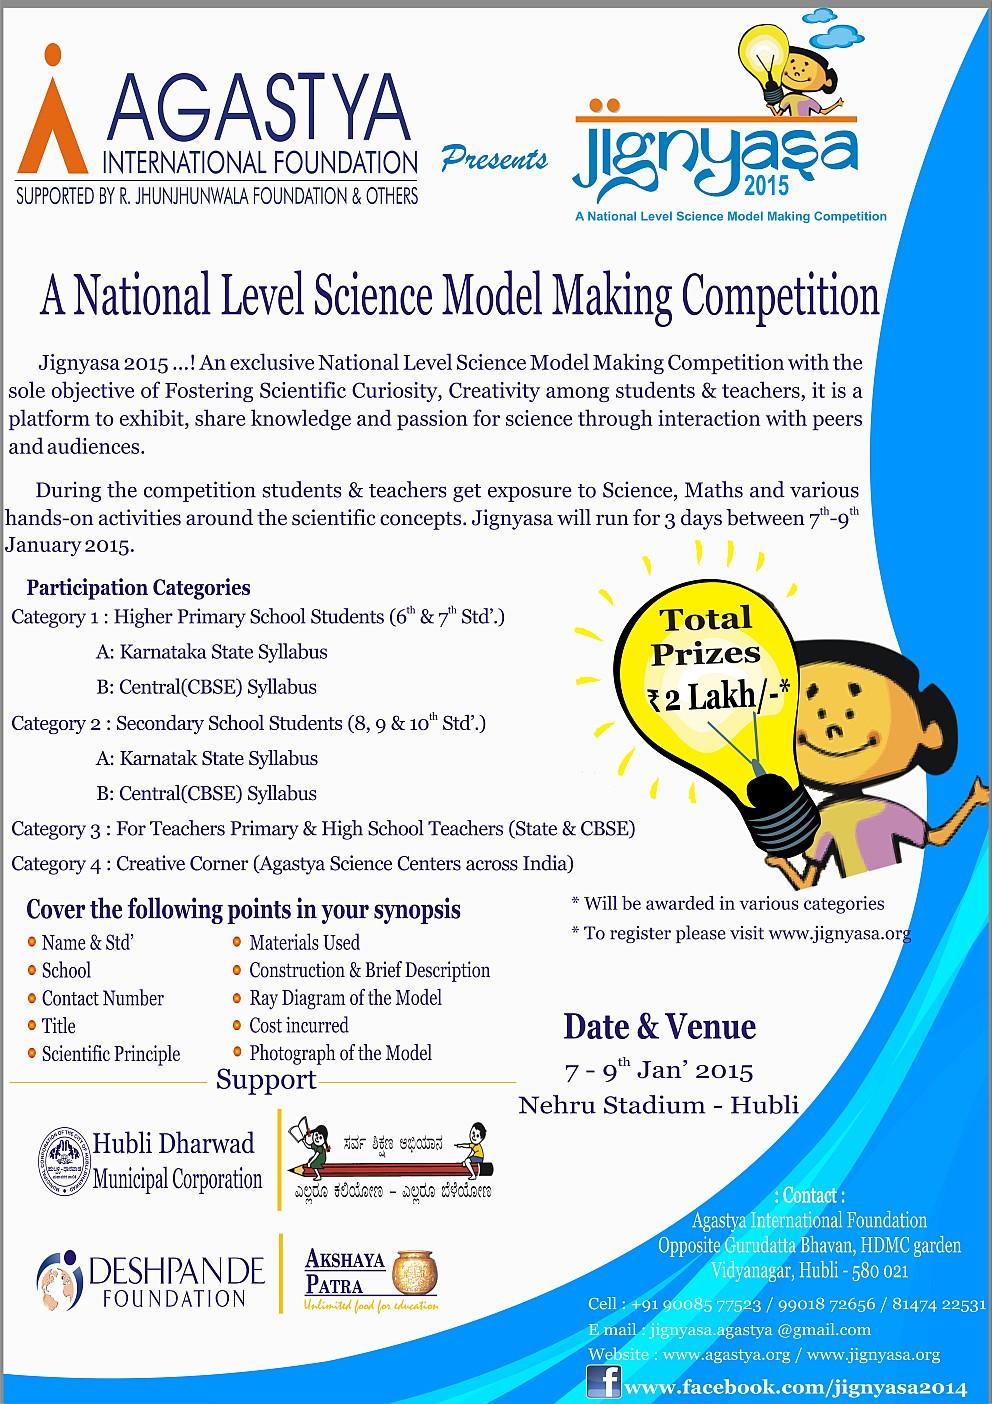 Jignyasa 2015 : National Level Science Model Making Competition for Students and Teachers